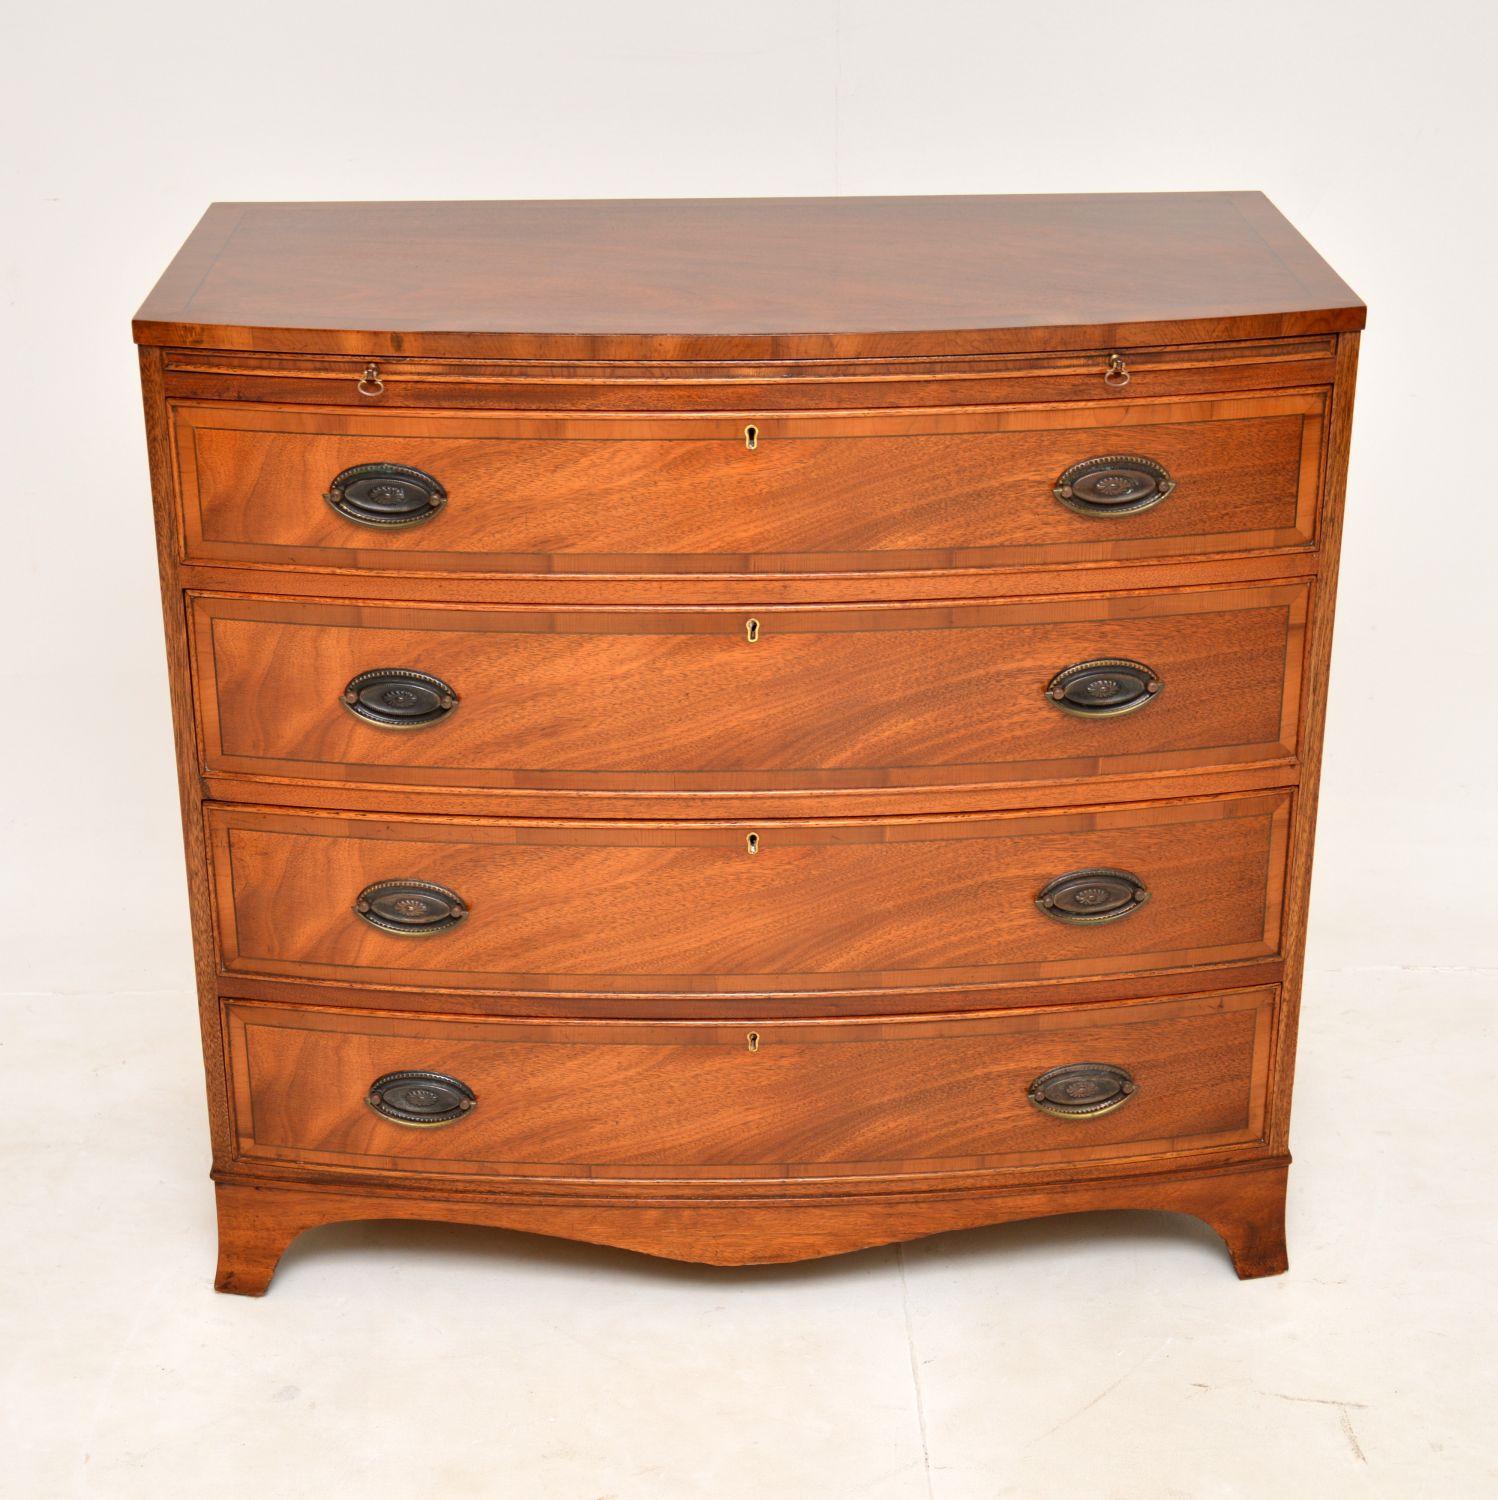 A smart and very well made antique chest of drawers in the Georgian style. This was made in England, it dates from around the 1950’s.

This elegant chest is of super quality and a great size with lots of storage space. It has a bow fronted design,